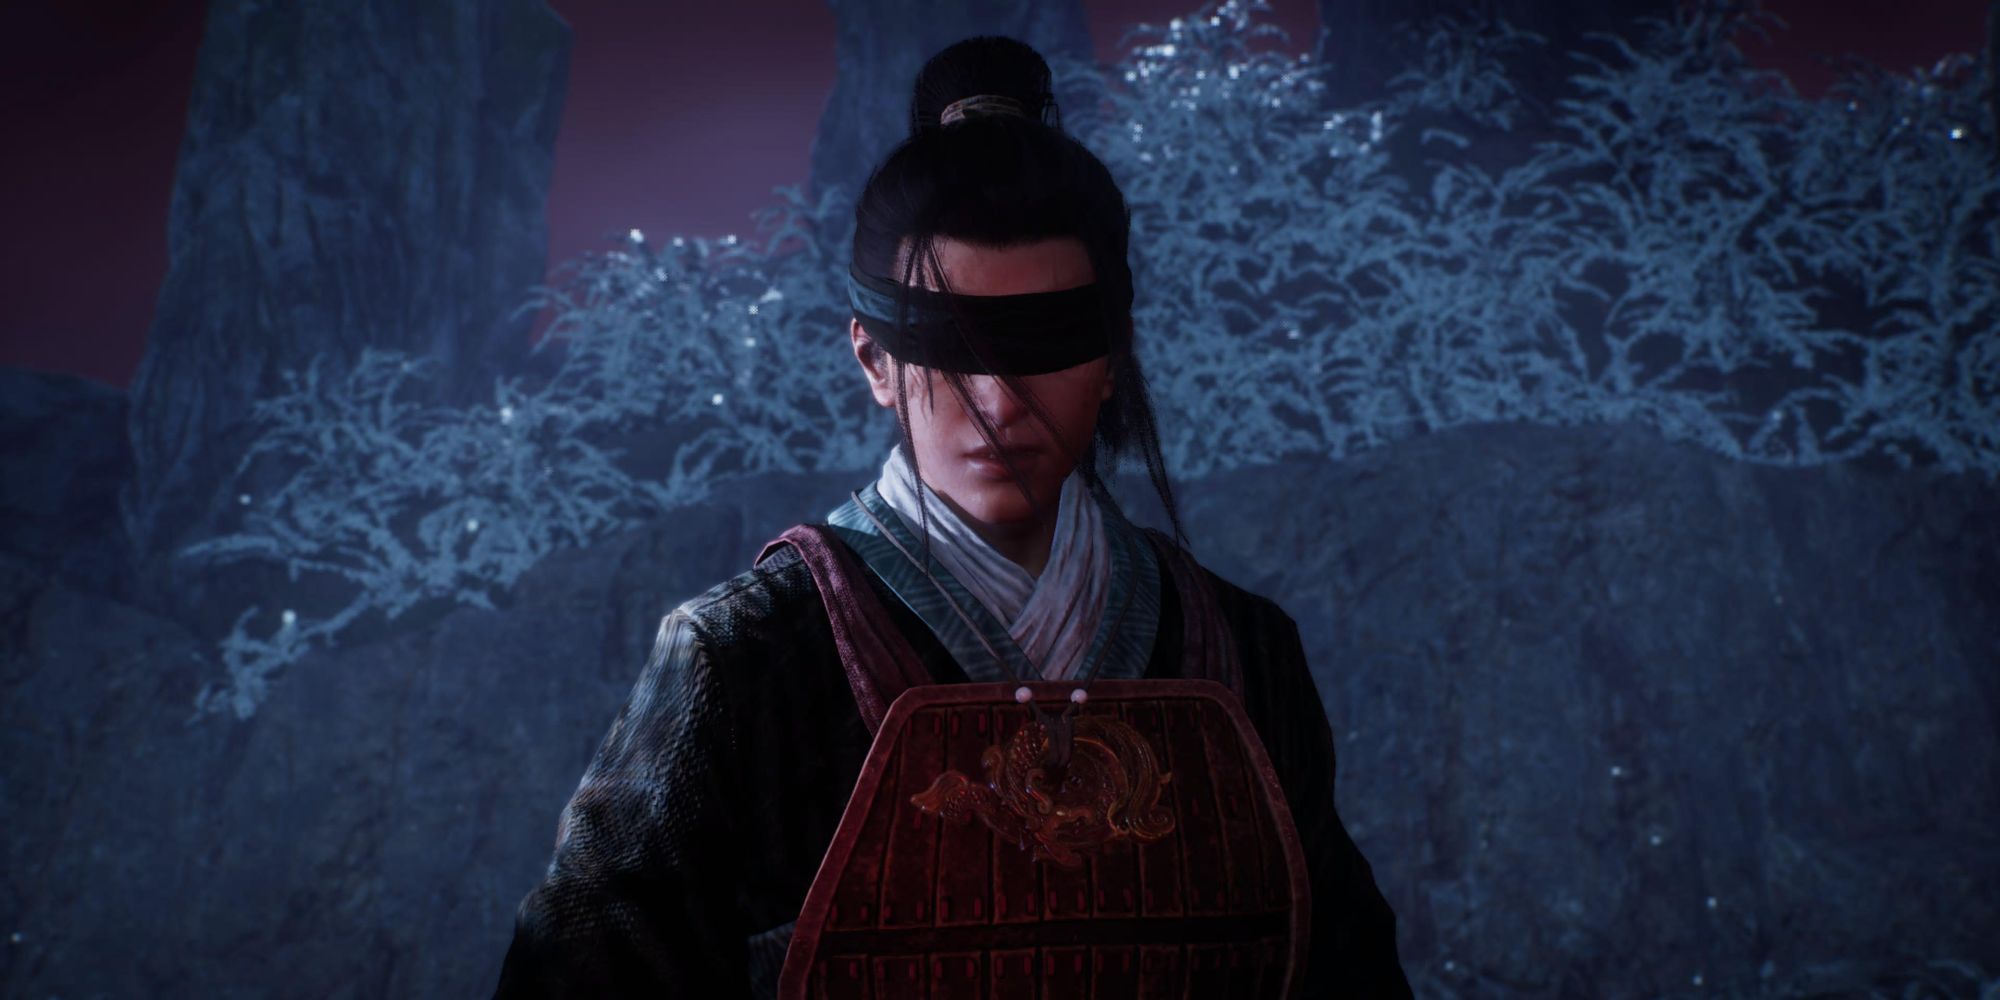 Wo Long: Fallen Dynasty - Blindfolded Boy seen in a cutscene before we fight him, standing before a large tree